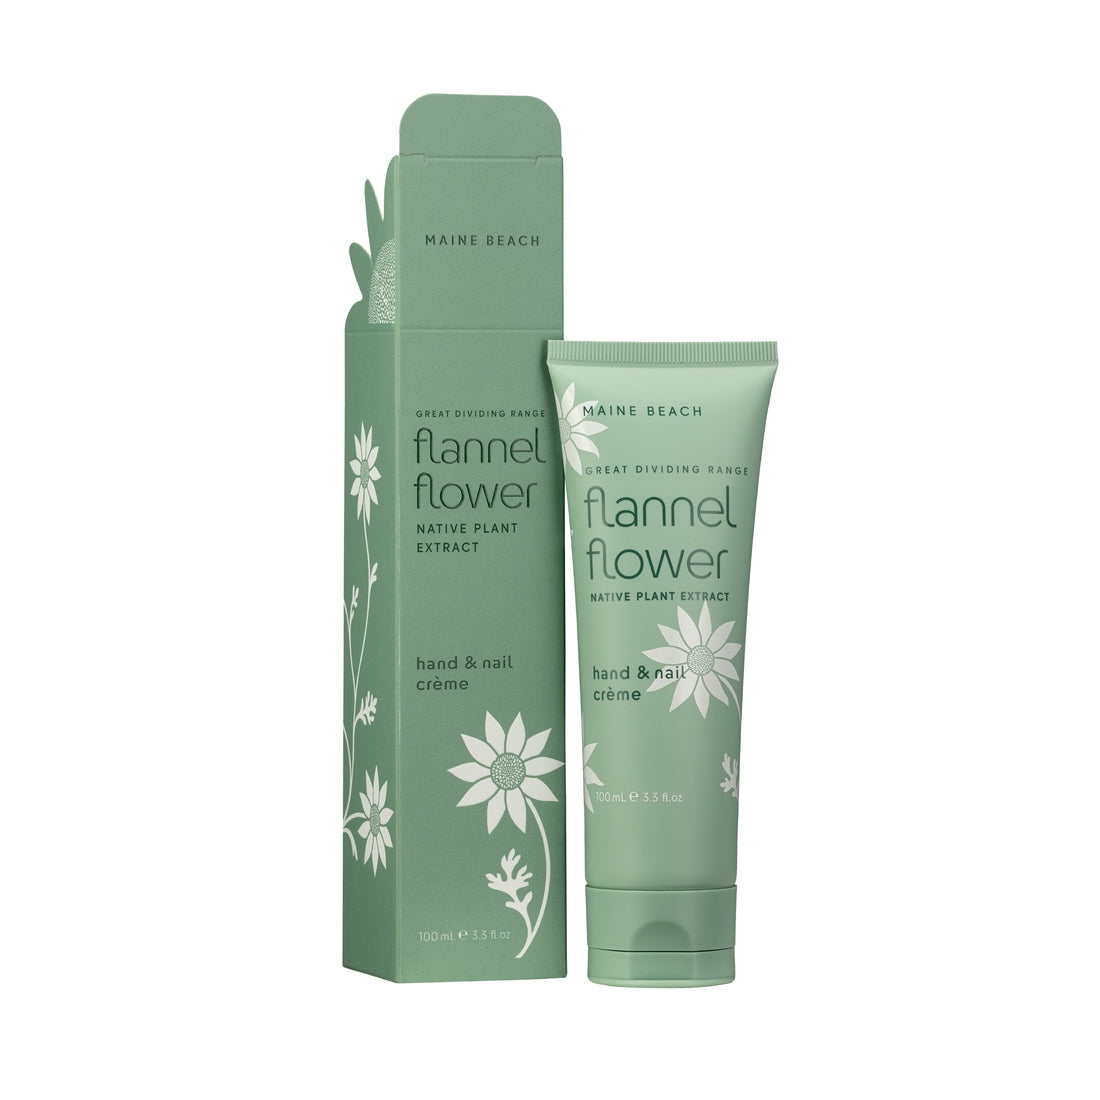 HAND AND NAIL CREME FLANNEL FLOWER 100ML MAINE BEACH SELFCARE Brief Affairs 